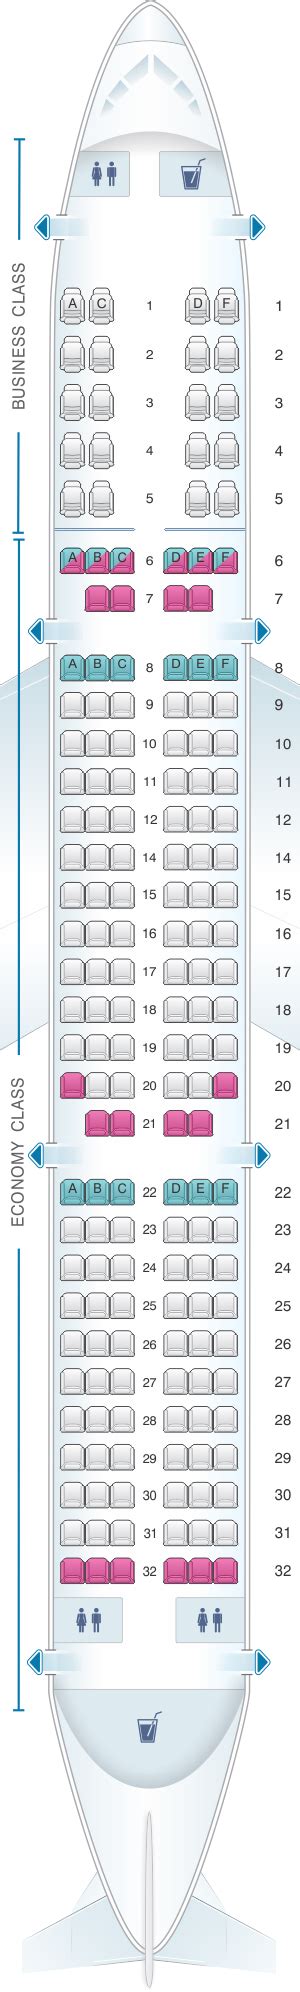 Flight seat map air india. Seat Specs: First: Pitch 88, Width 23. Business: Pitch 76, Width 19.95. Economy: Pitch 34, Width 18. Guru Tips. This Boeing 777-200LR seats 238 passengers in a three-class configuration and is primarily used on long-haul routes. There are 8 flat bed seats in First Class, 35 anlged-flat seats in Business, and 195 standard Economy Class seats. 